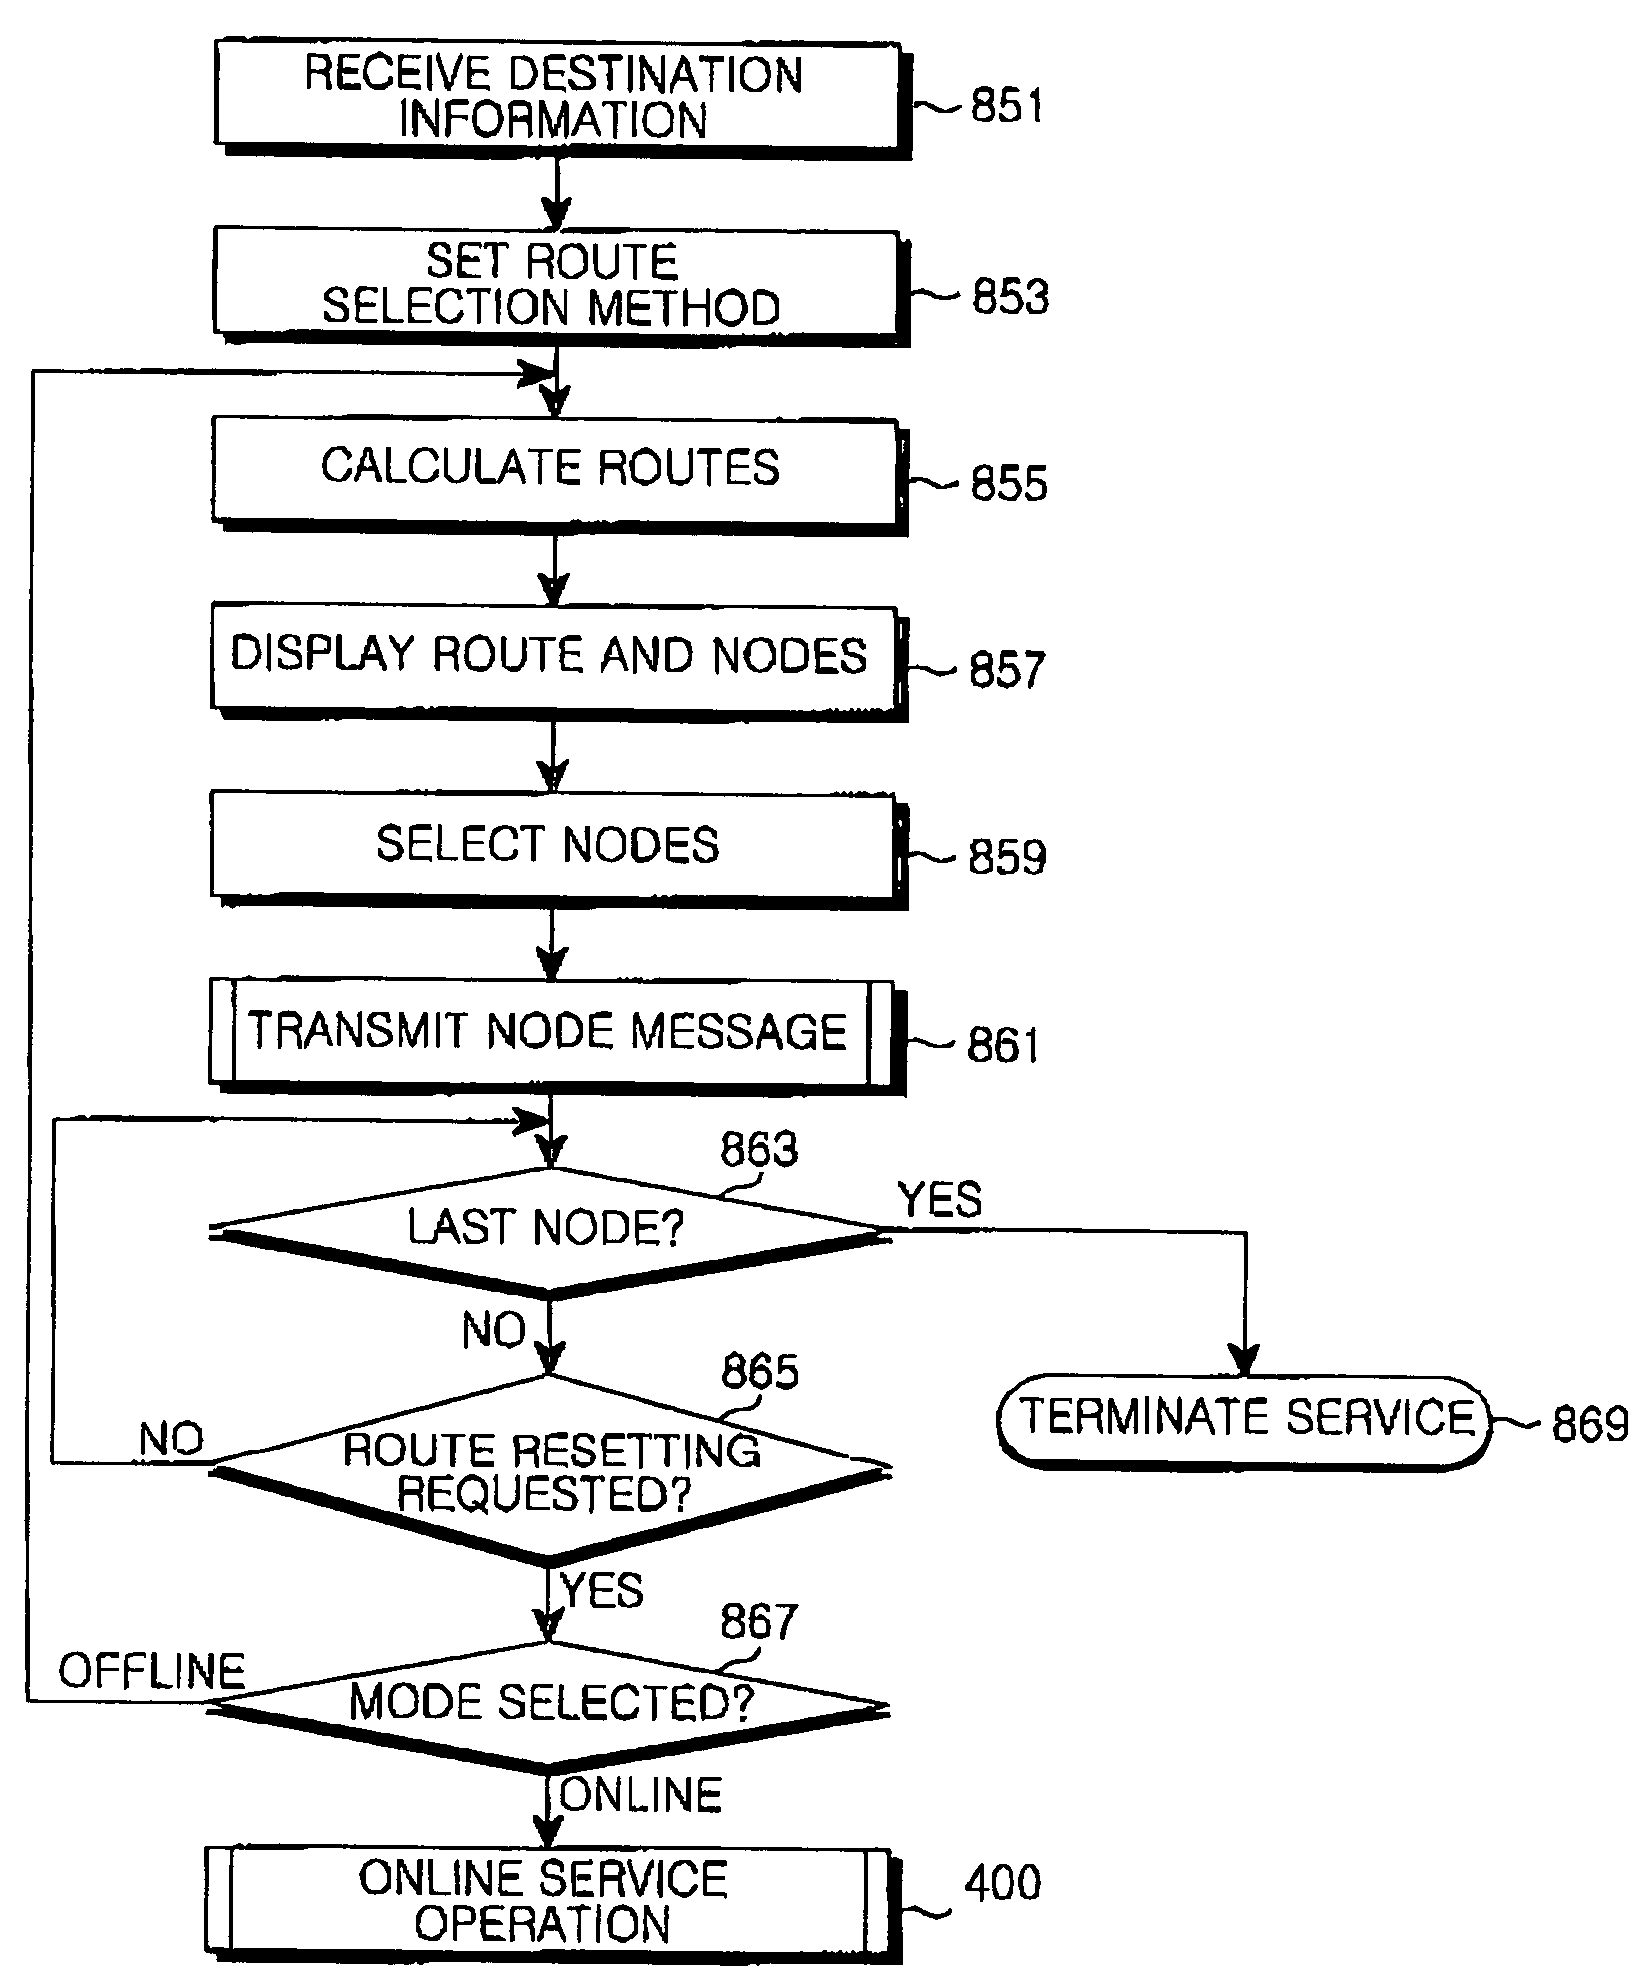 System and method of displaying position information including an image in a navigation system